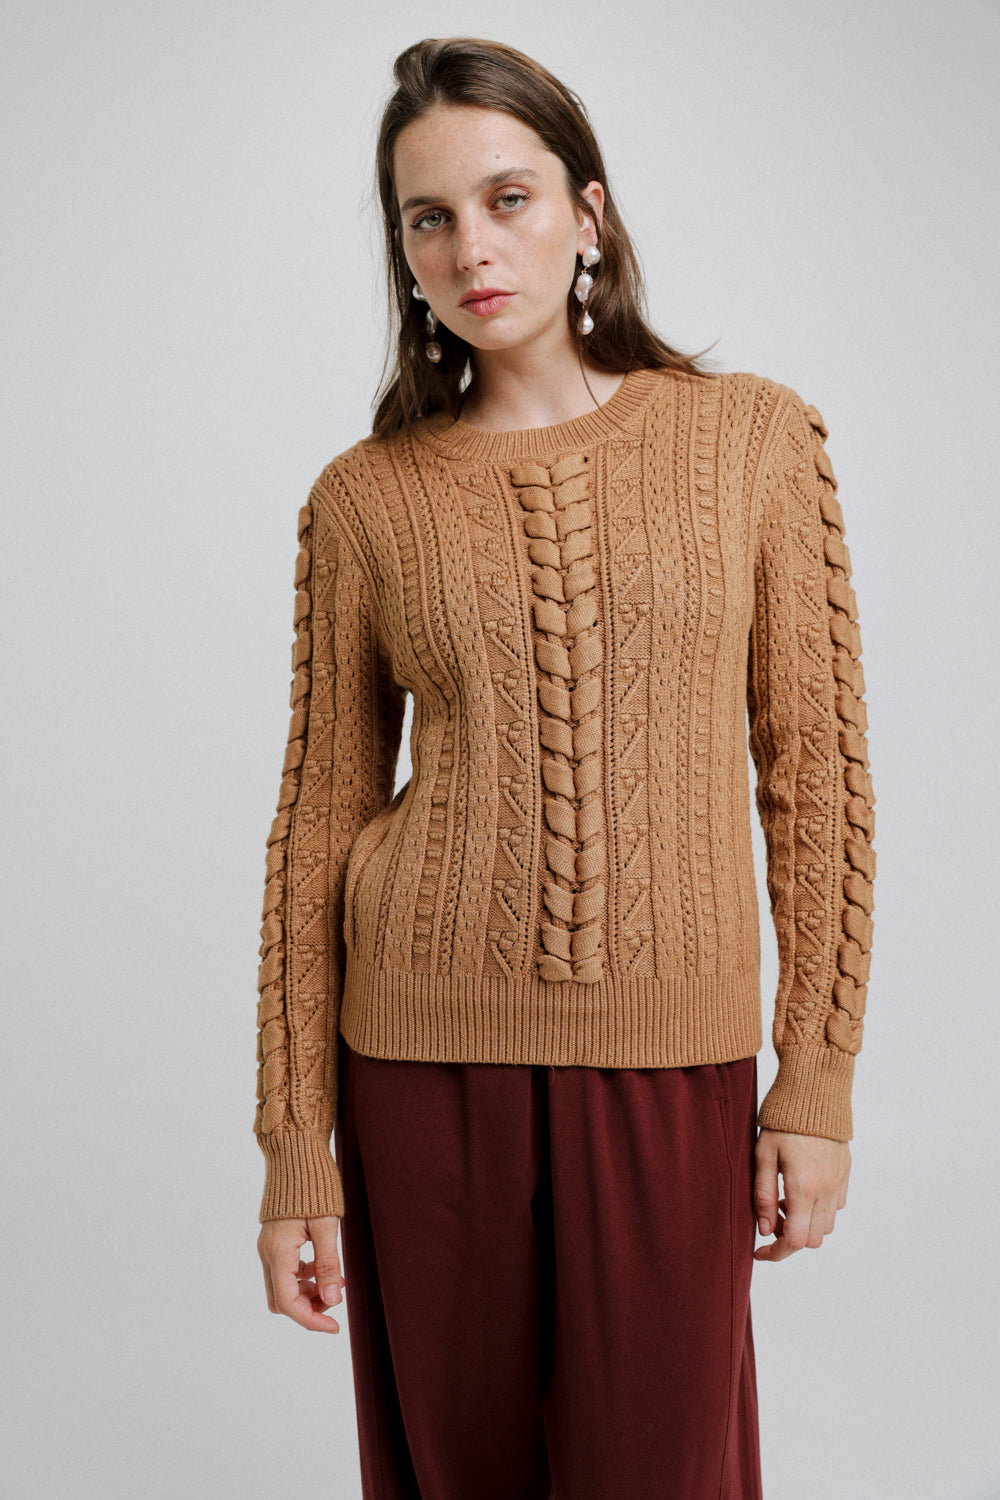 Knitted Braid Gold Sweater